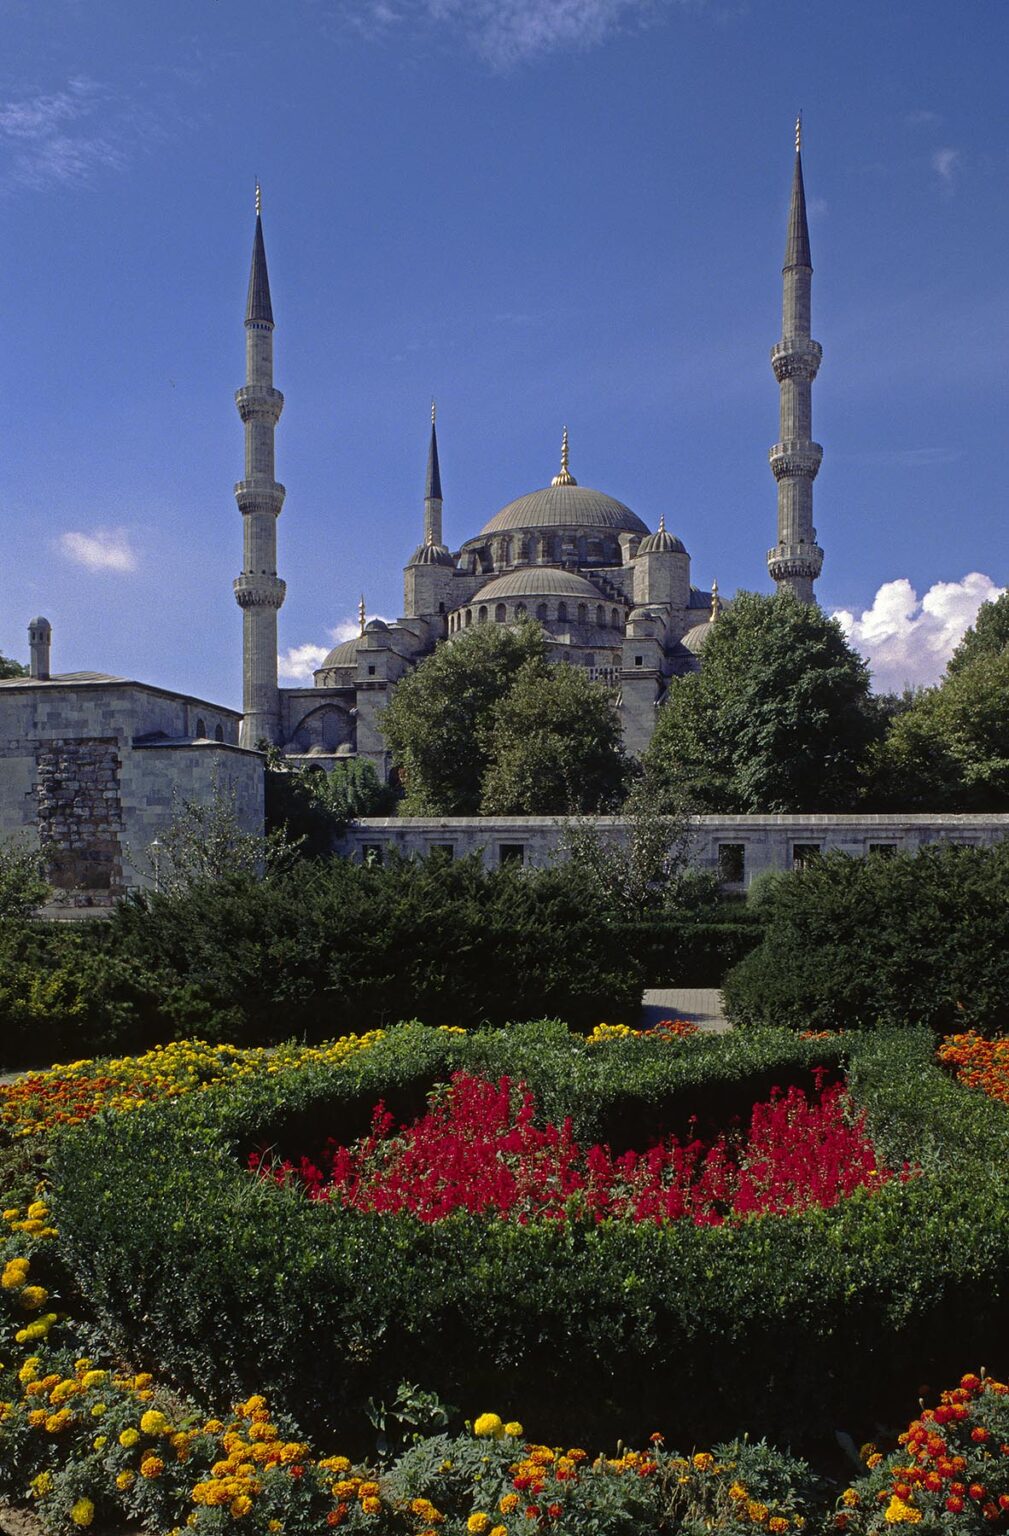 Flower gardens and The Blue Mosque (Sultanahmet Camii) which was completed in 1616 and has 6 Minarets and 260 windows - Istanbul, Turkey